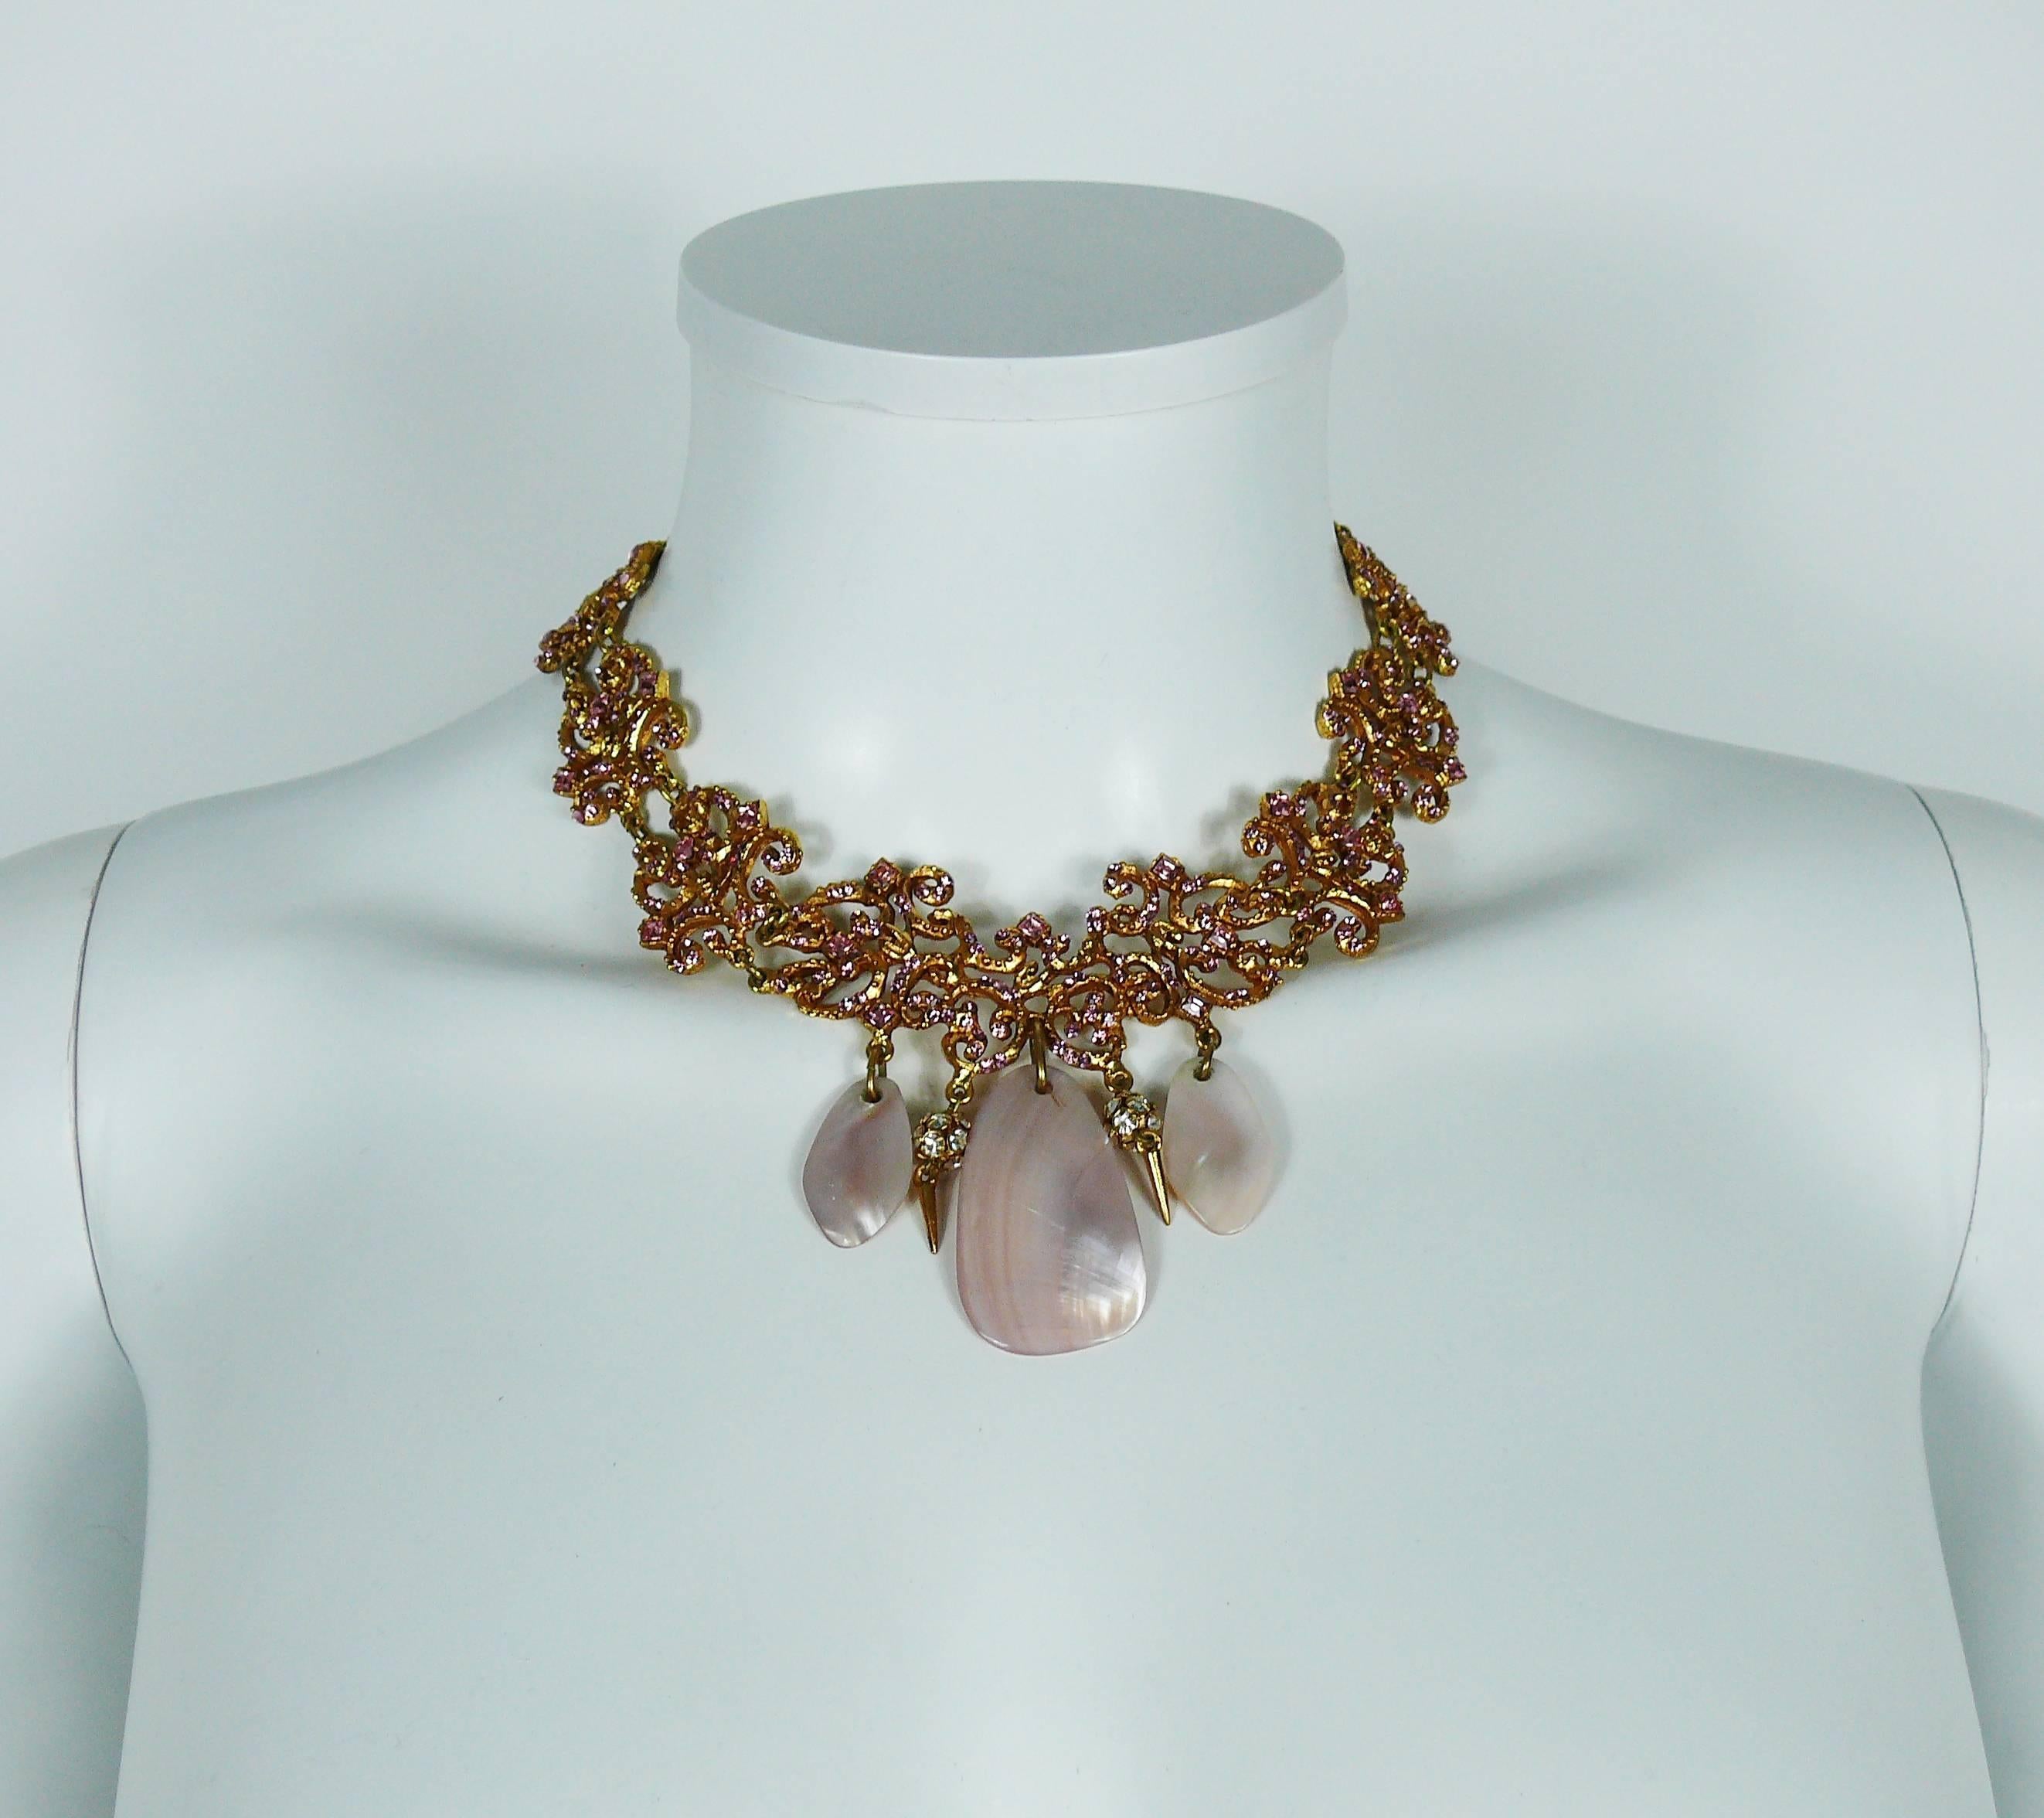 CHRISTIAN LACROIX gorgeous vintage gold toned necklace featuring an openwork arabesque design embellished with pink crystals and mother of pearl charms.

T-bar closure.
Extension chain.

Marked CHRISTIAN LACROIX CL Made in France.

Indicative